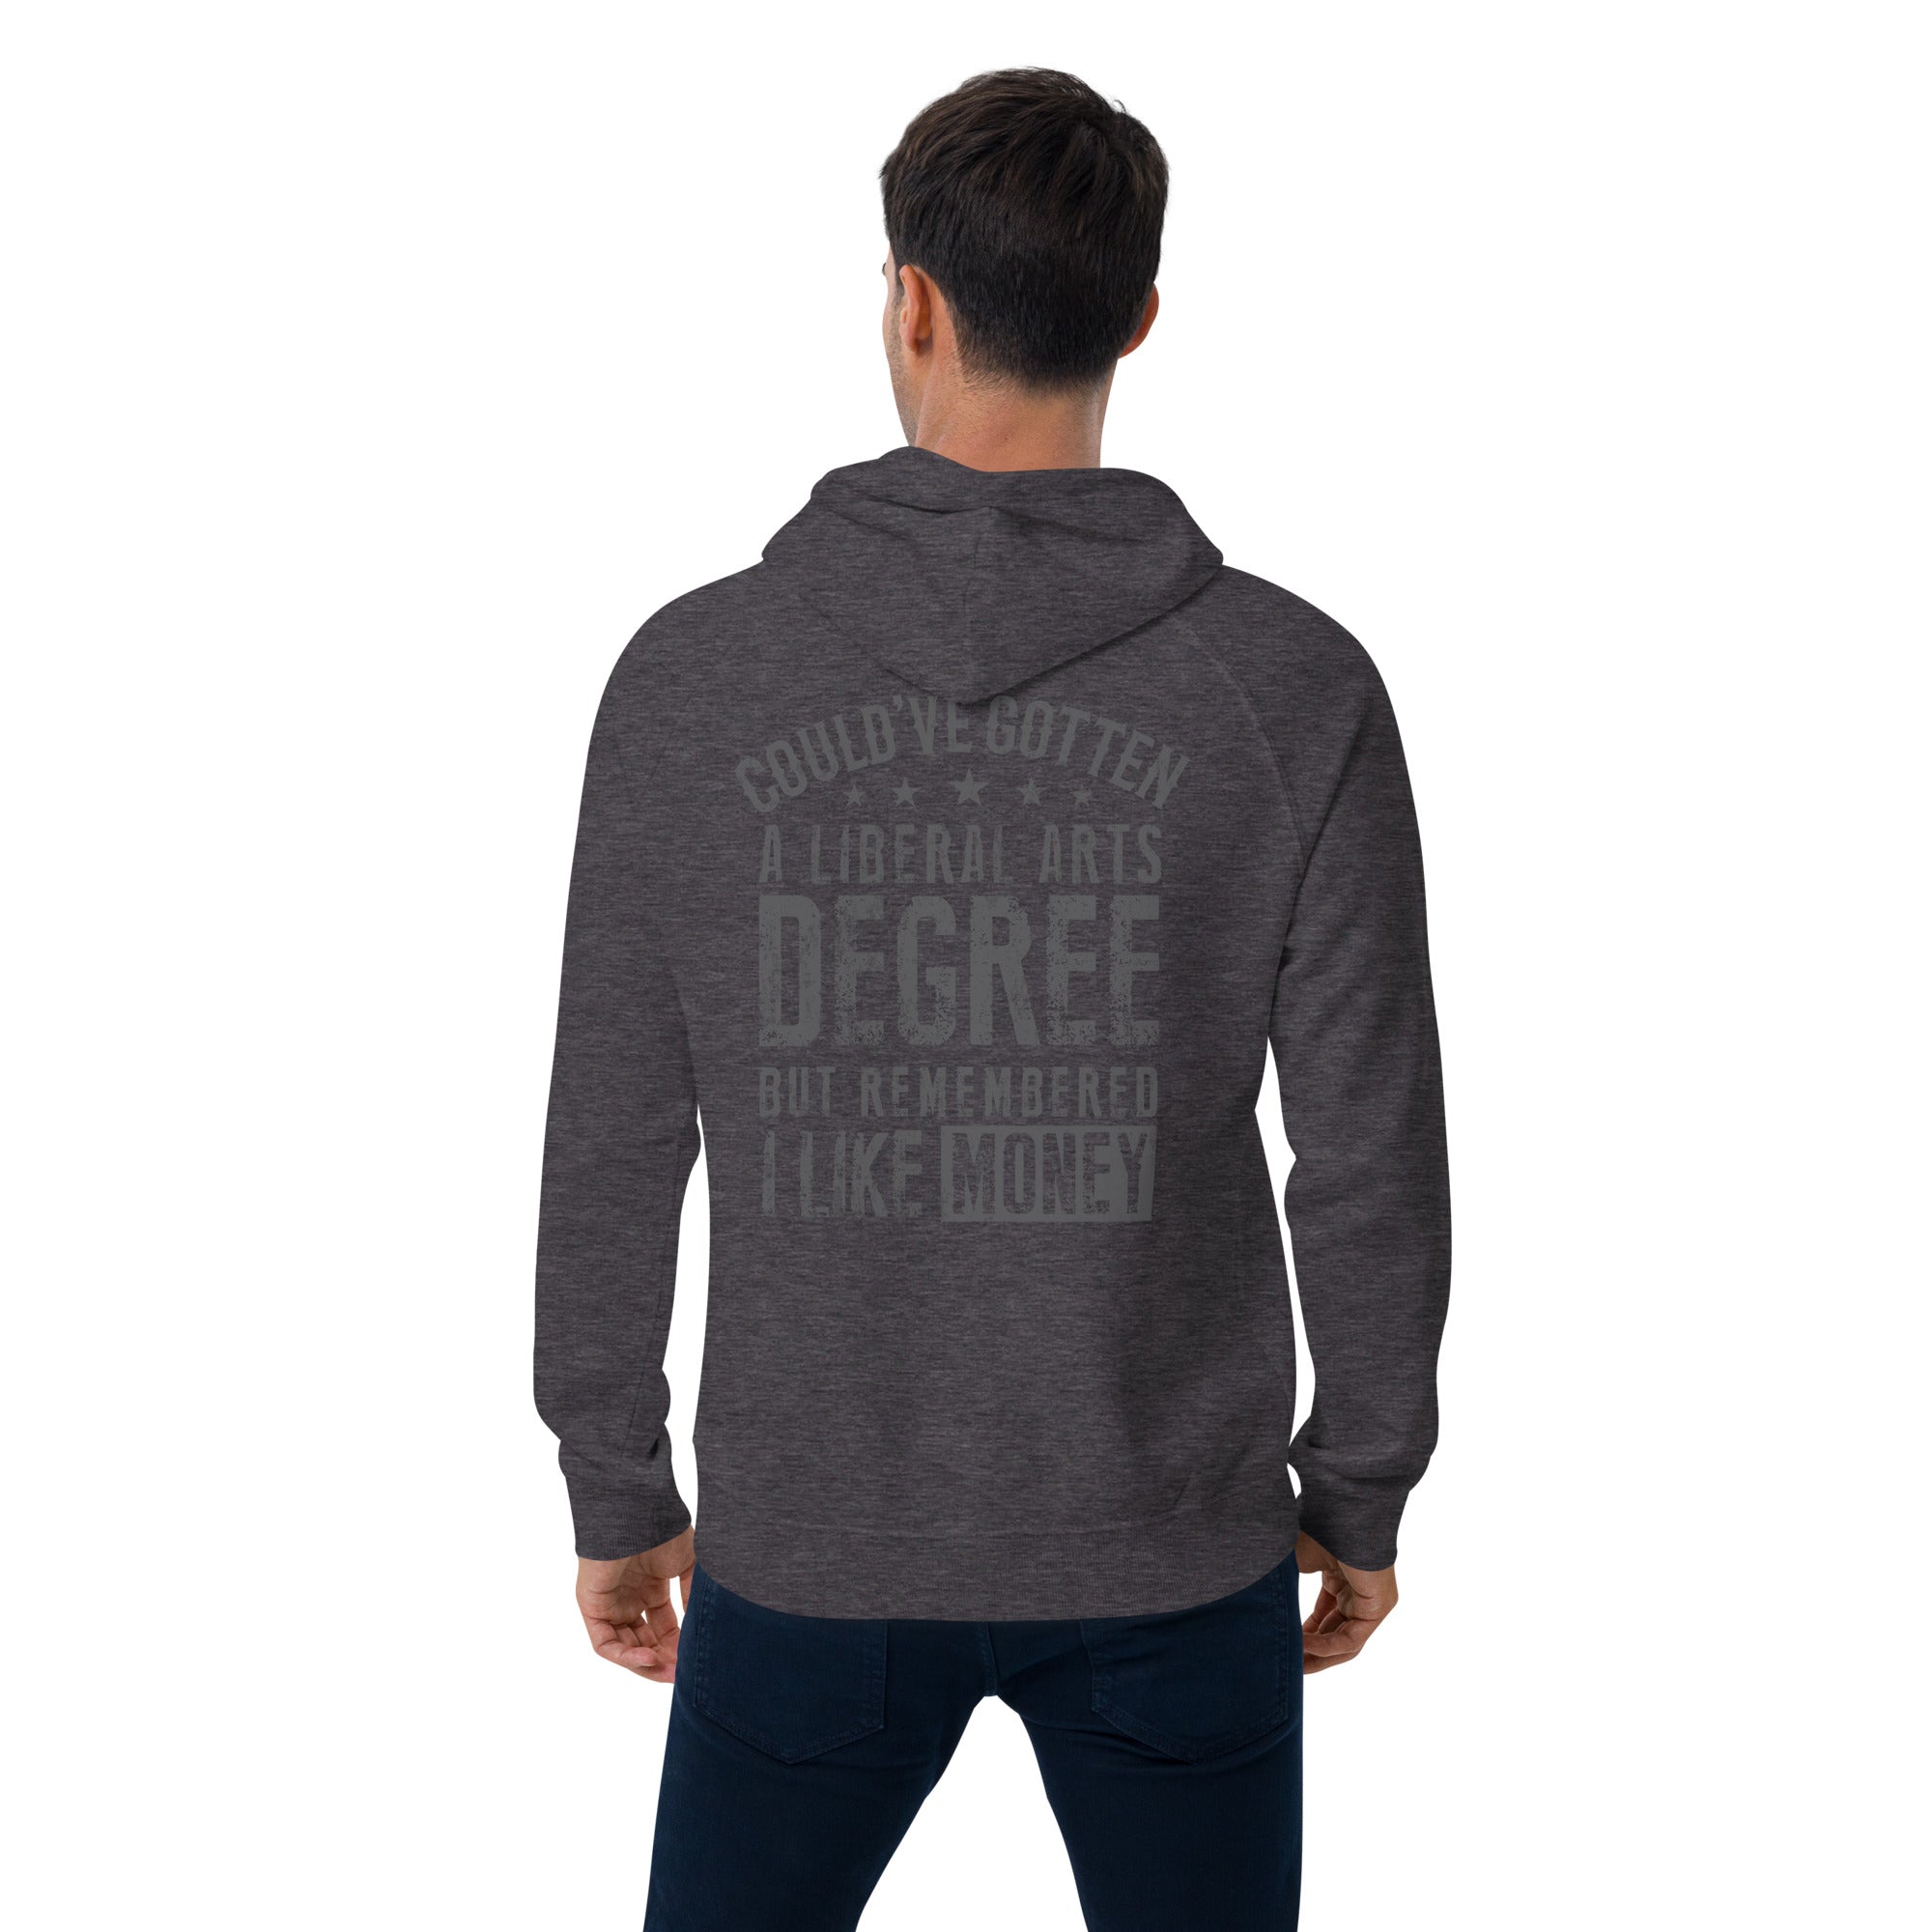 Couldve gotten a Liberal Arts degree but remembered I like money  I  Men's eco raglan hoodie